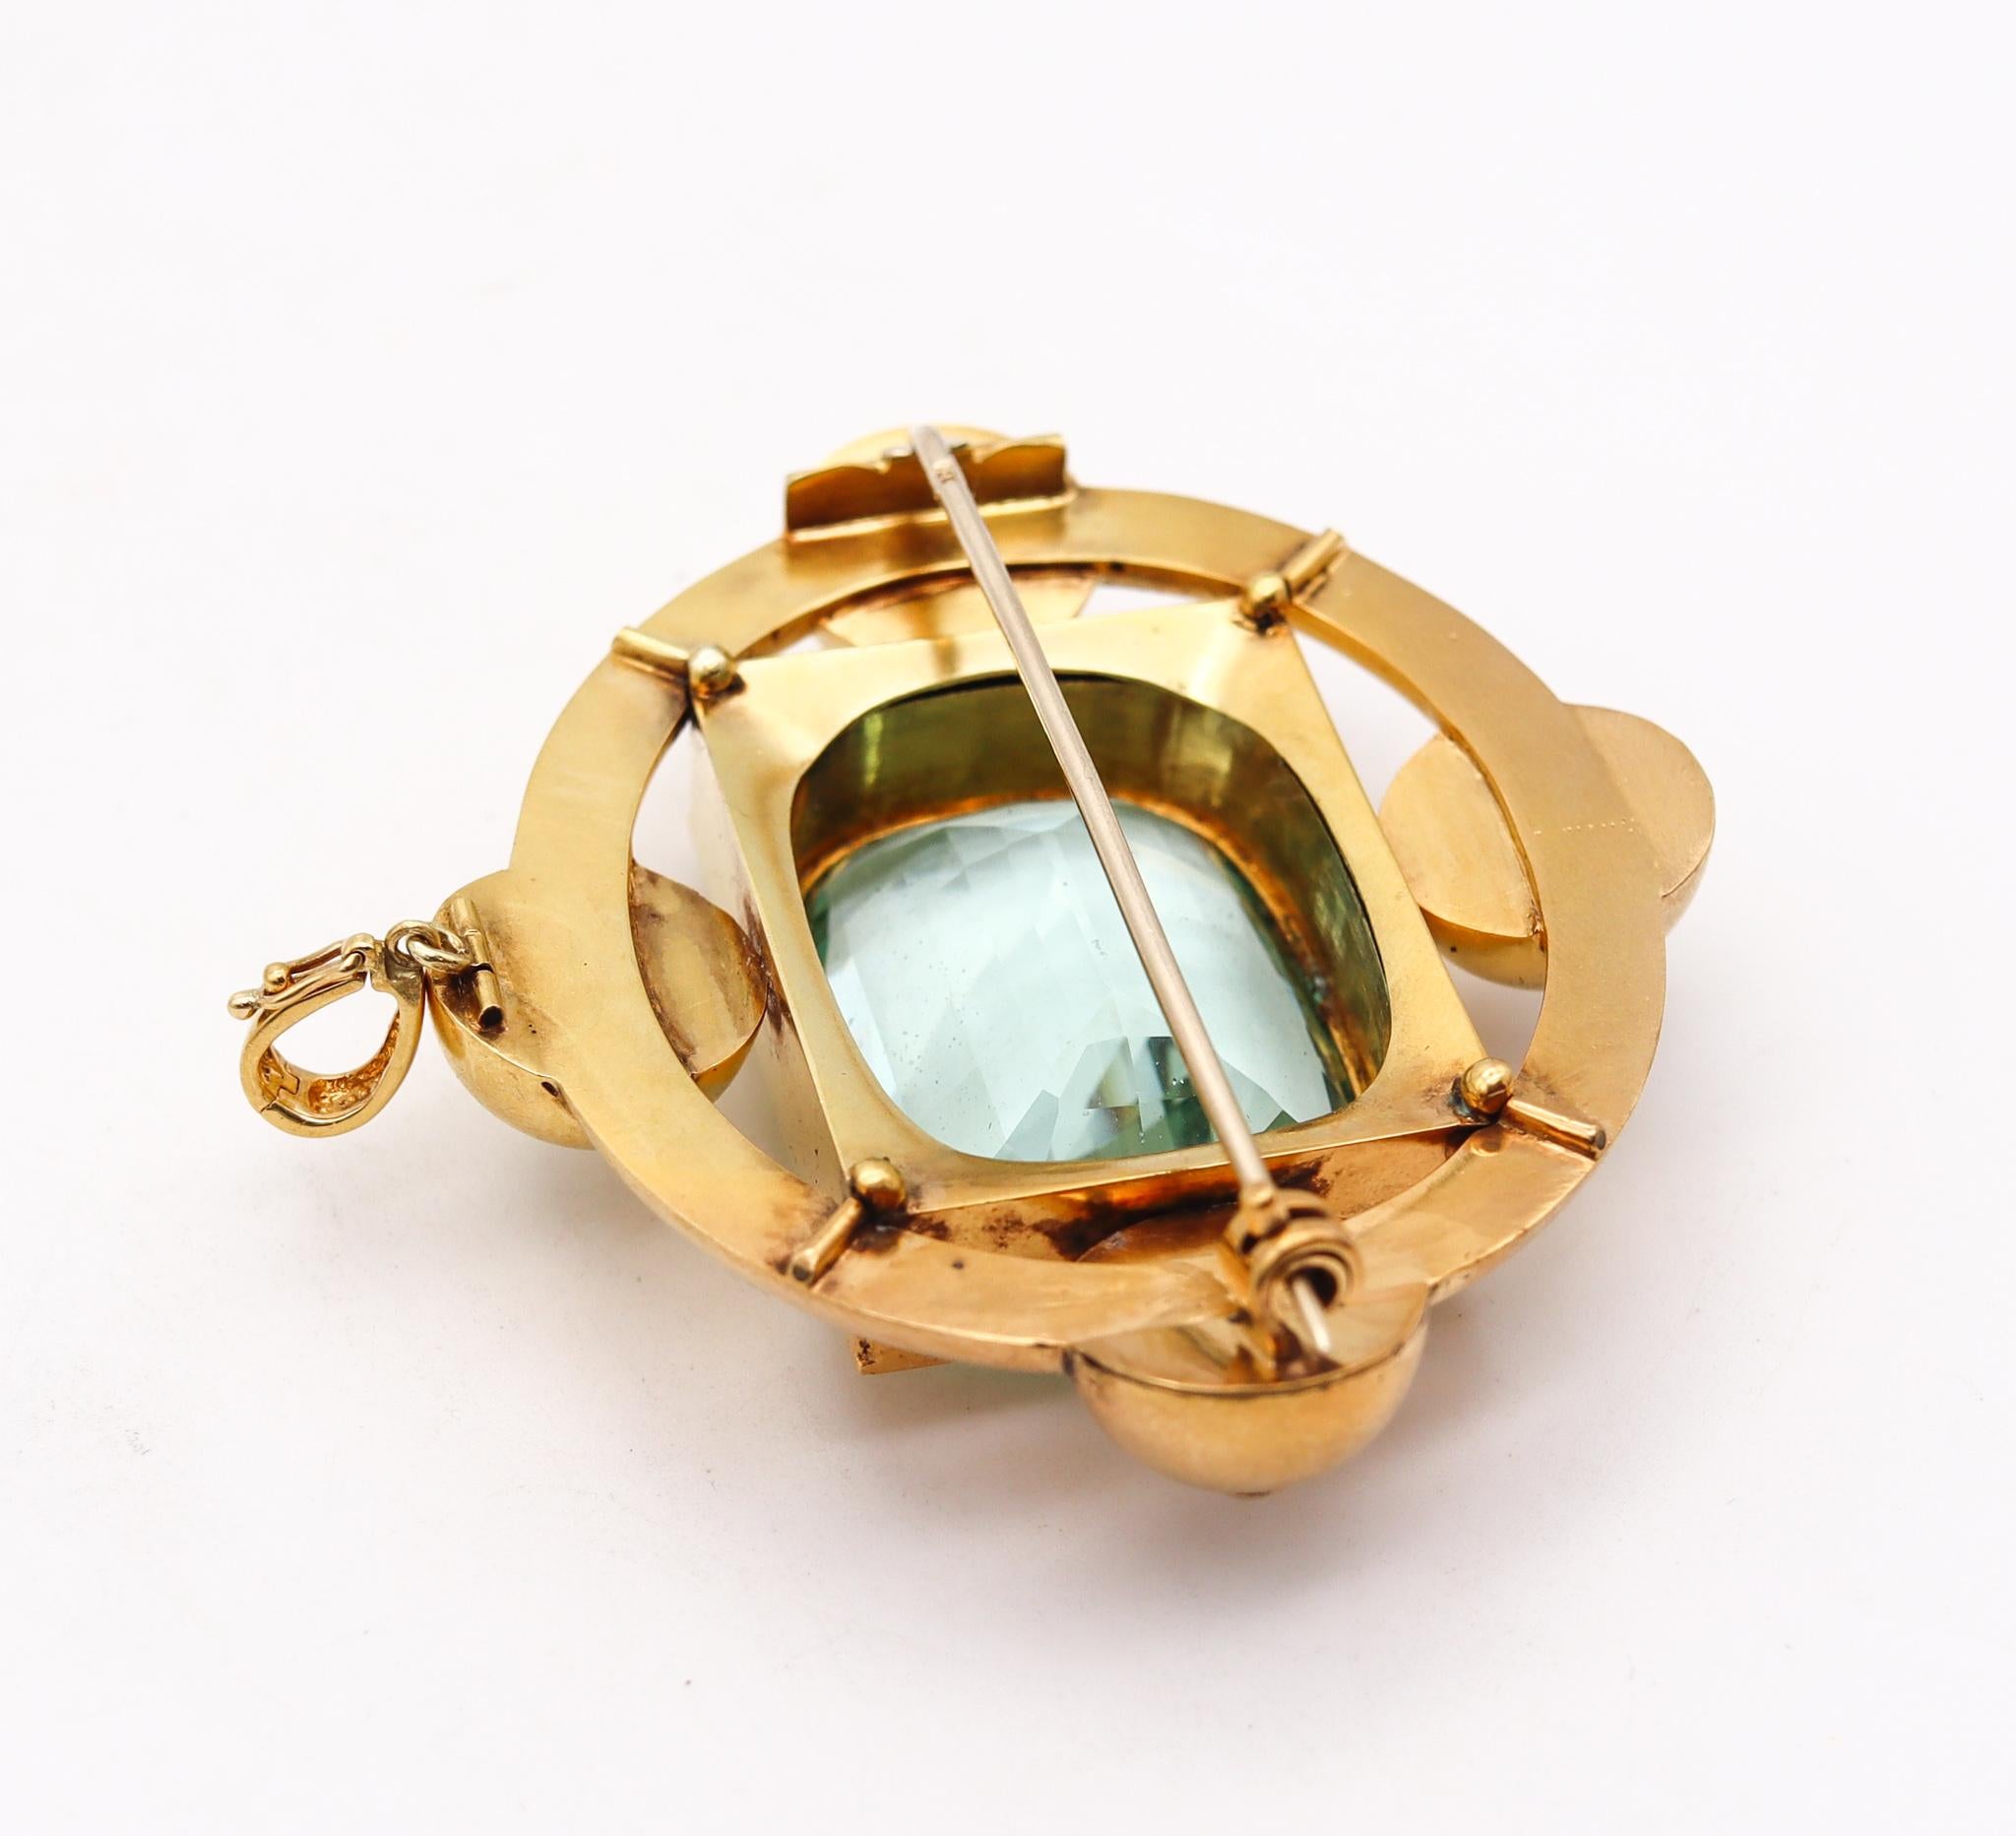 Late Victorian Victorian 1880 Convertible Pendant Brooch in 18Kt Gold with 58.56 Cts Aquamarine